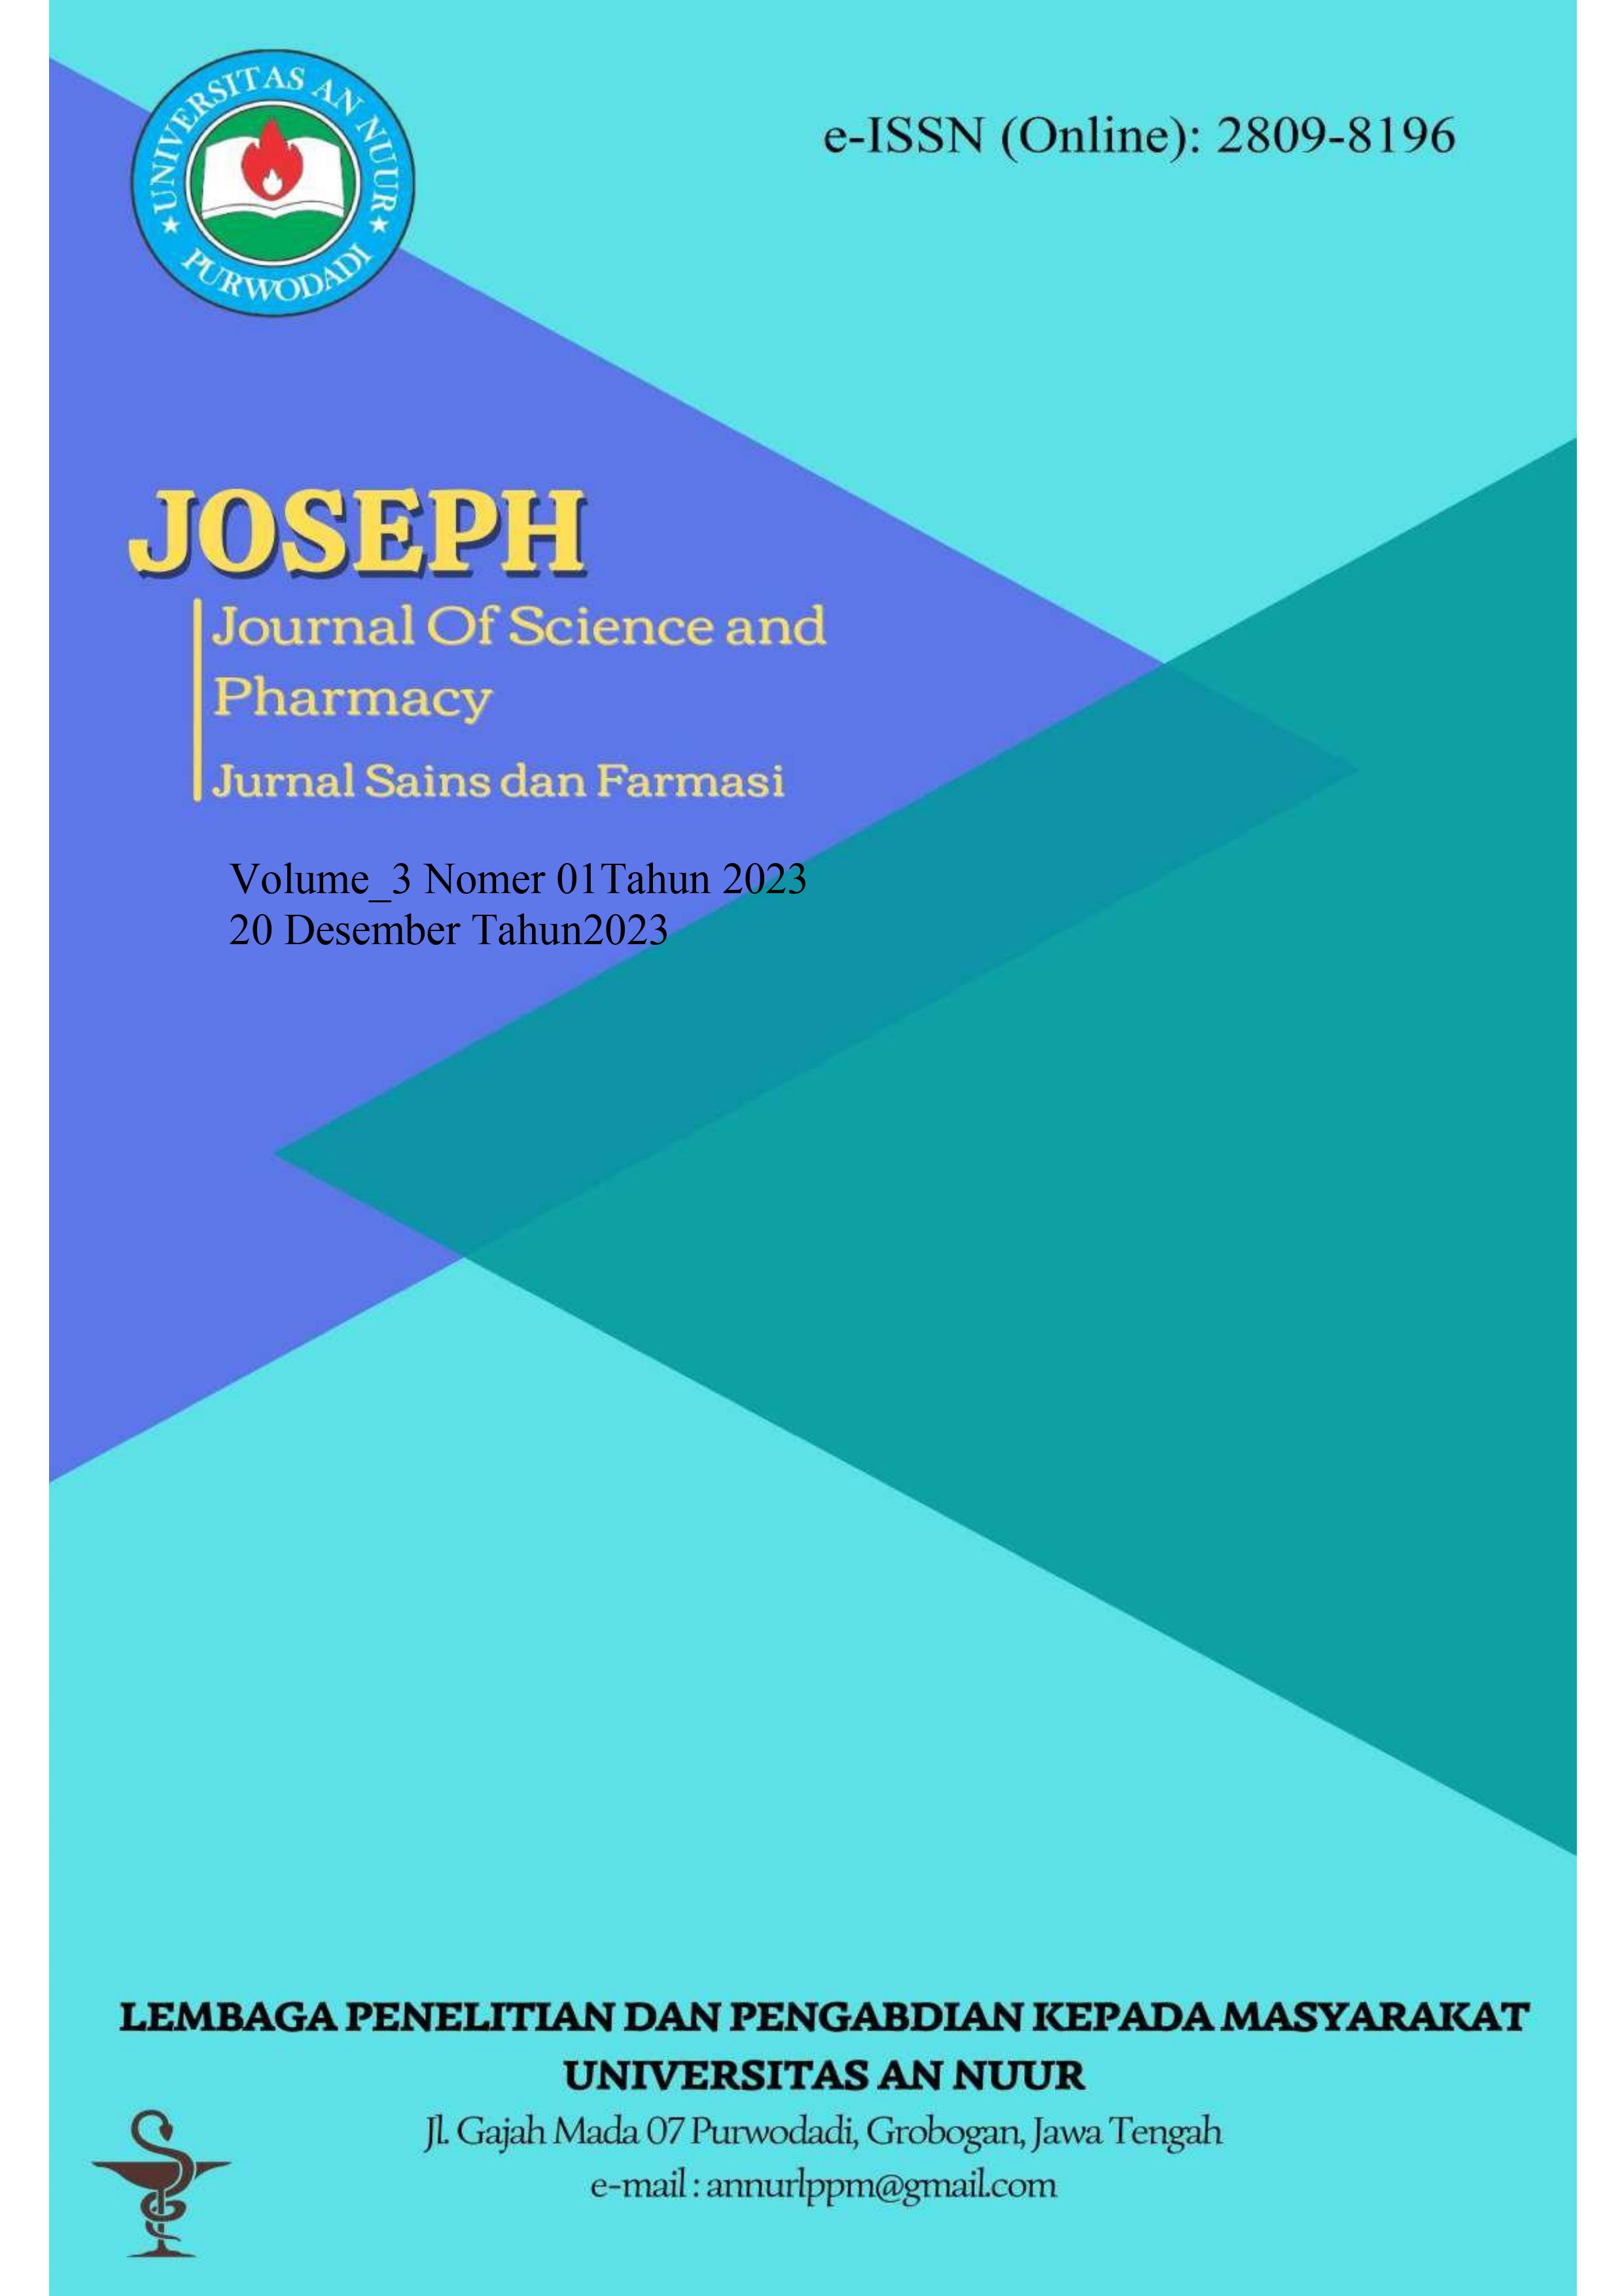 					View Vol. 3 No. 01 (2023): Journal of Science and Pharmacy (Joseph)
				